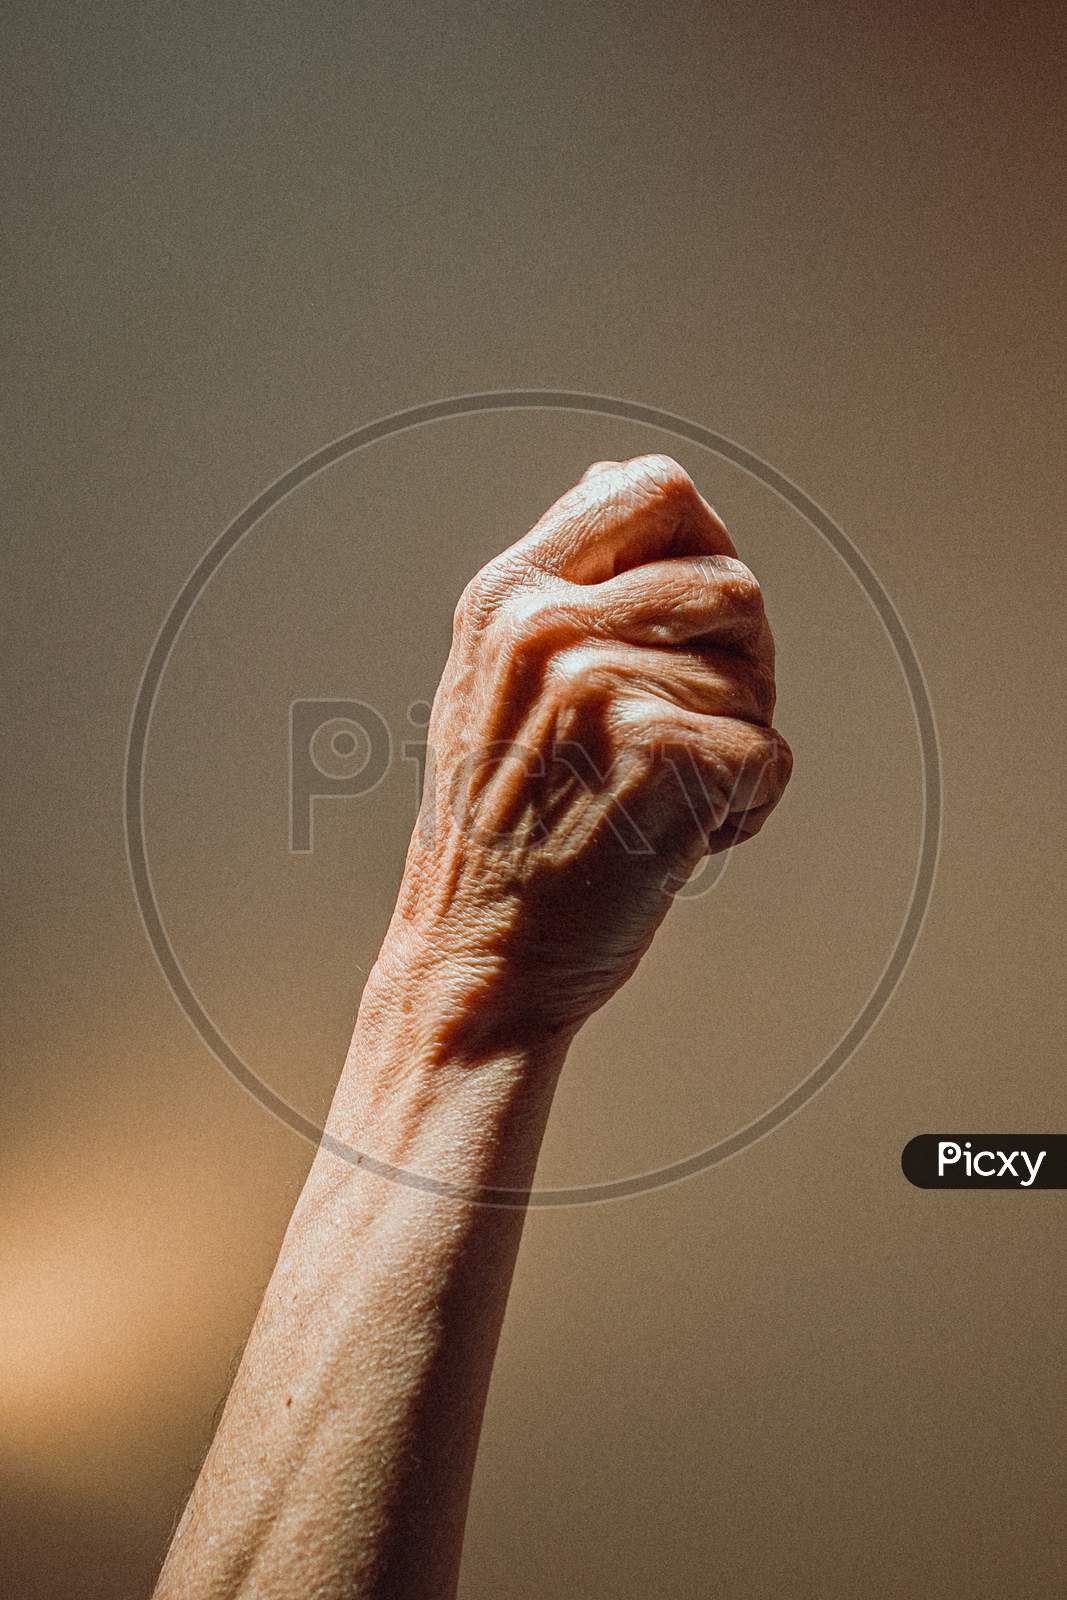 Old Woman Closed Hand Rising On Pastel Tones With Lights